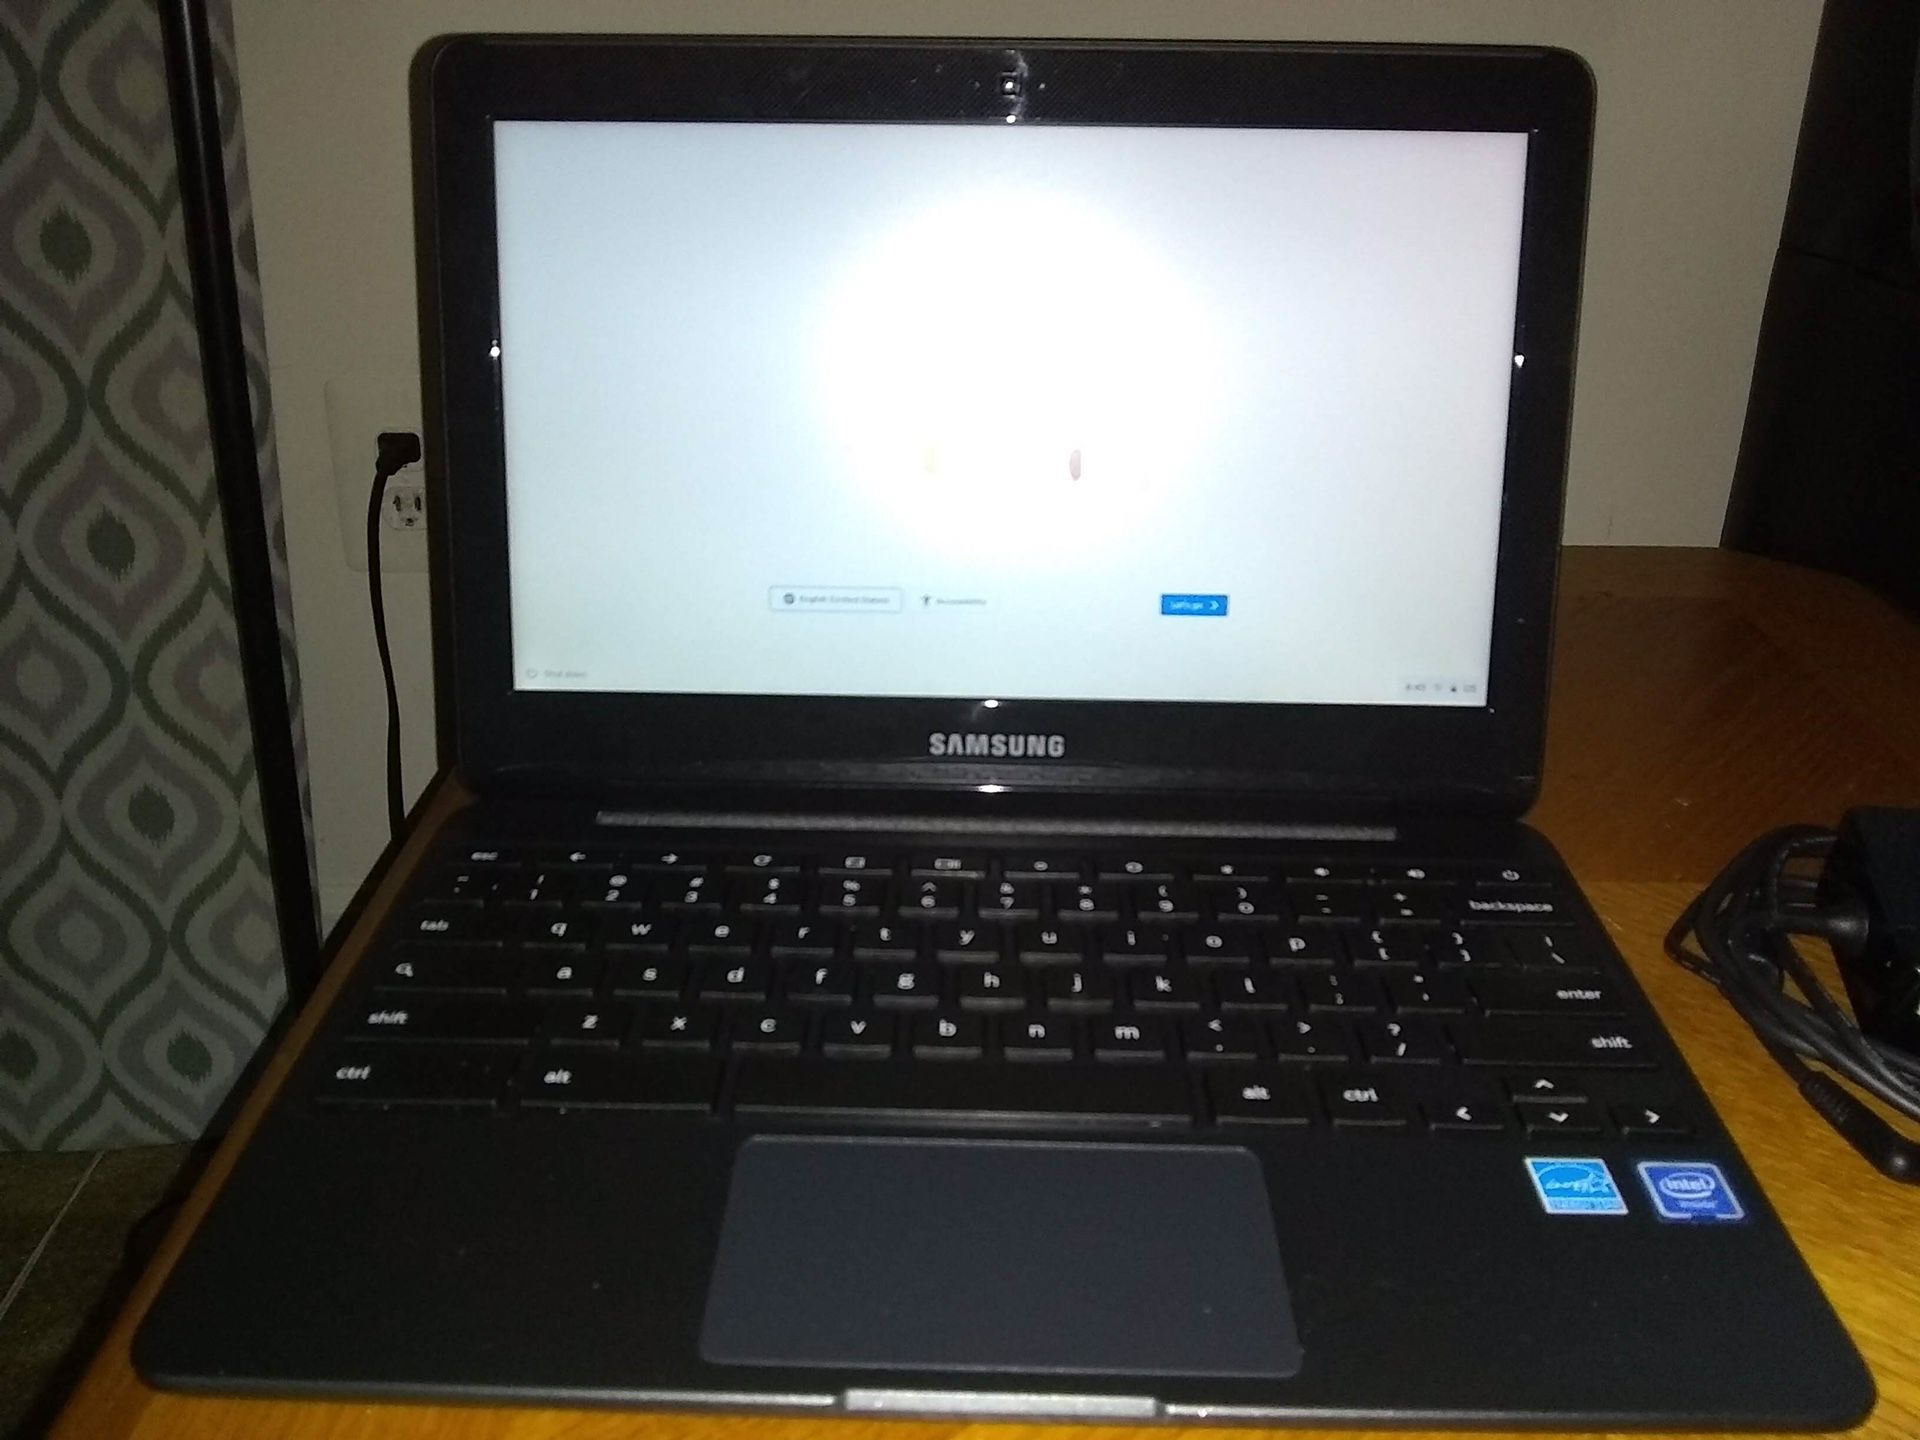 Samsung Chromebook 3 11.6” great condition